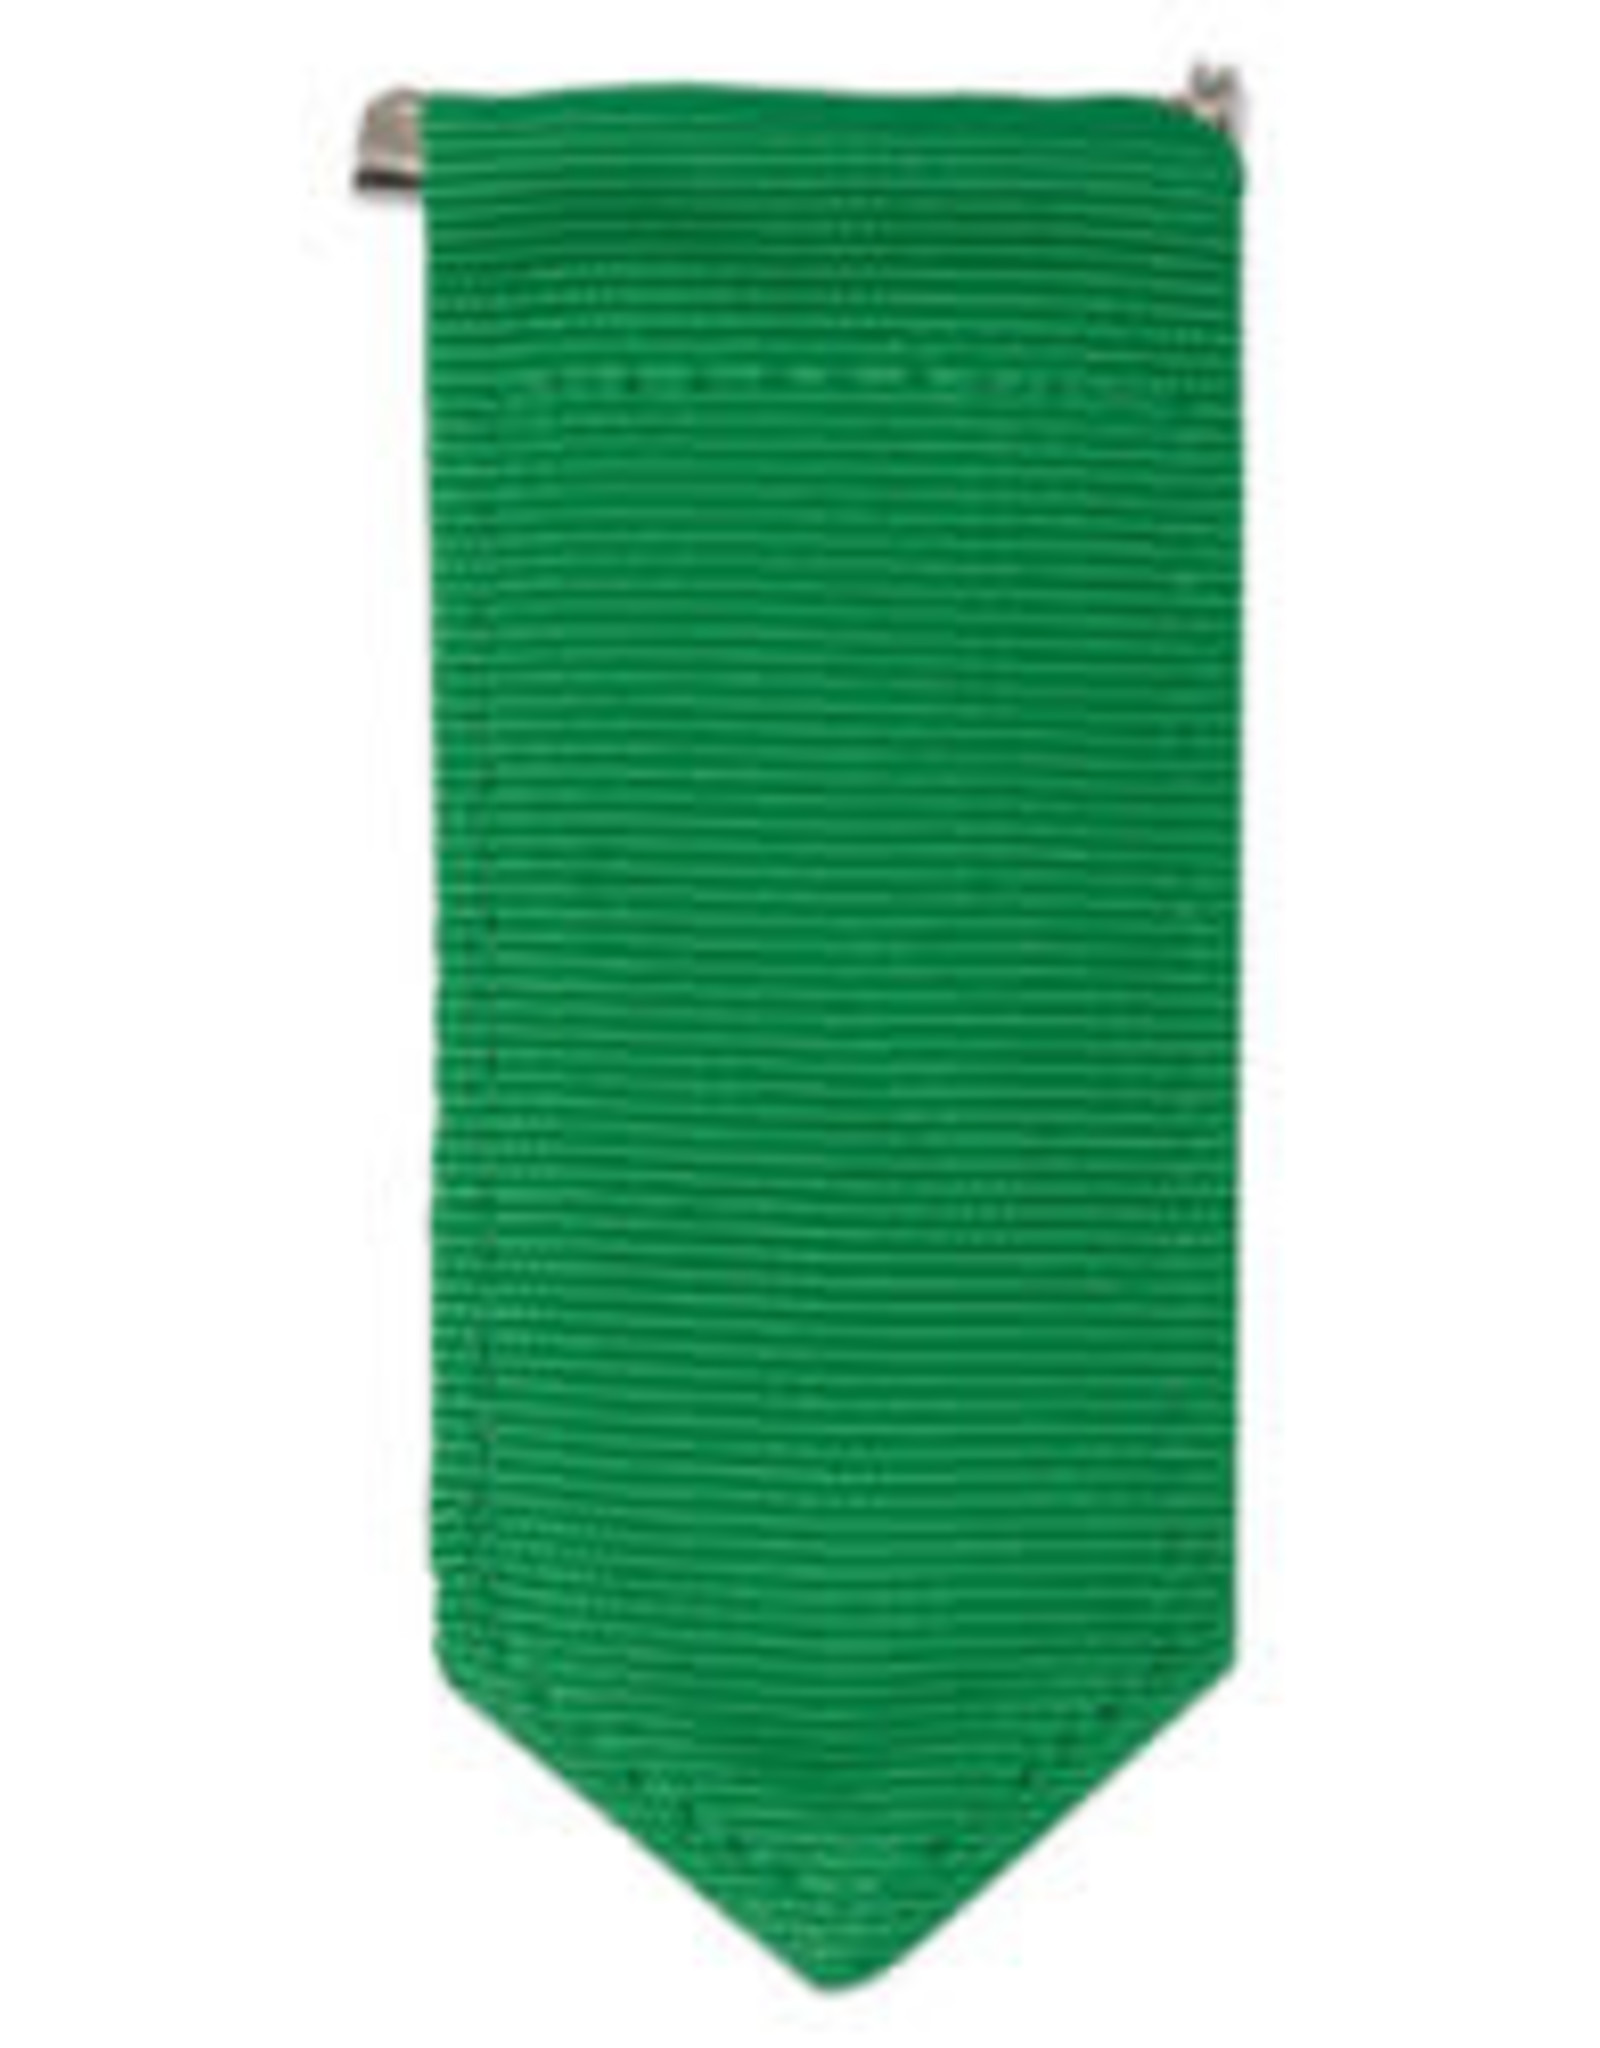 GIRL SCOUTS OF THE USA Adult Insignia Tab